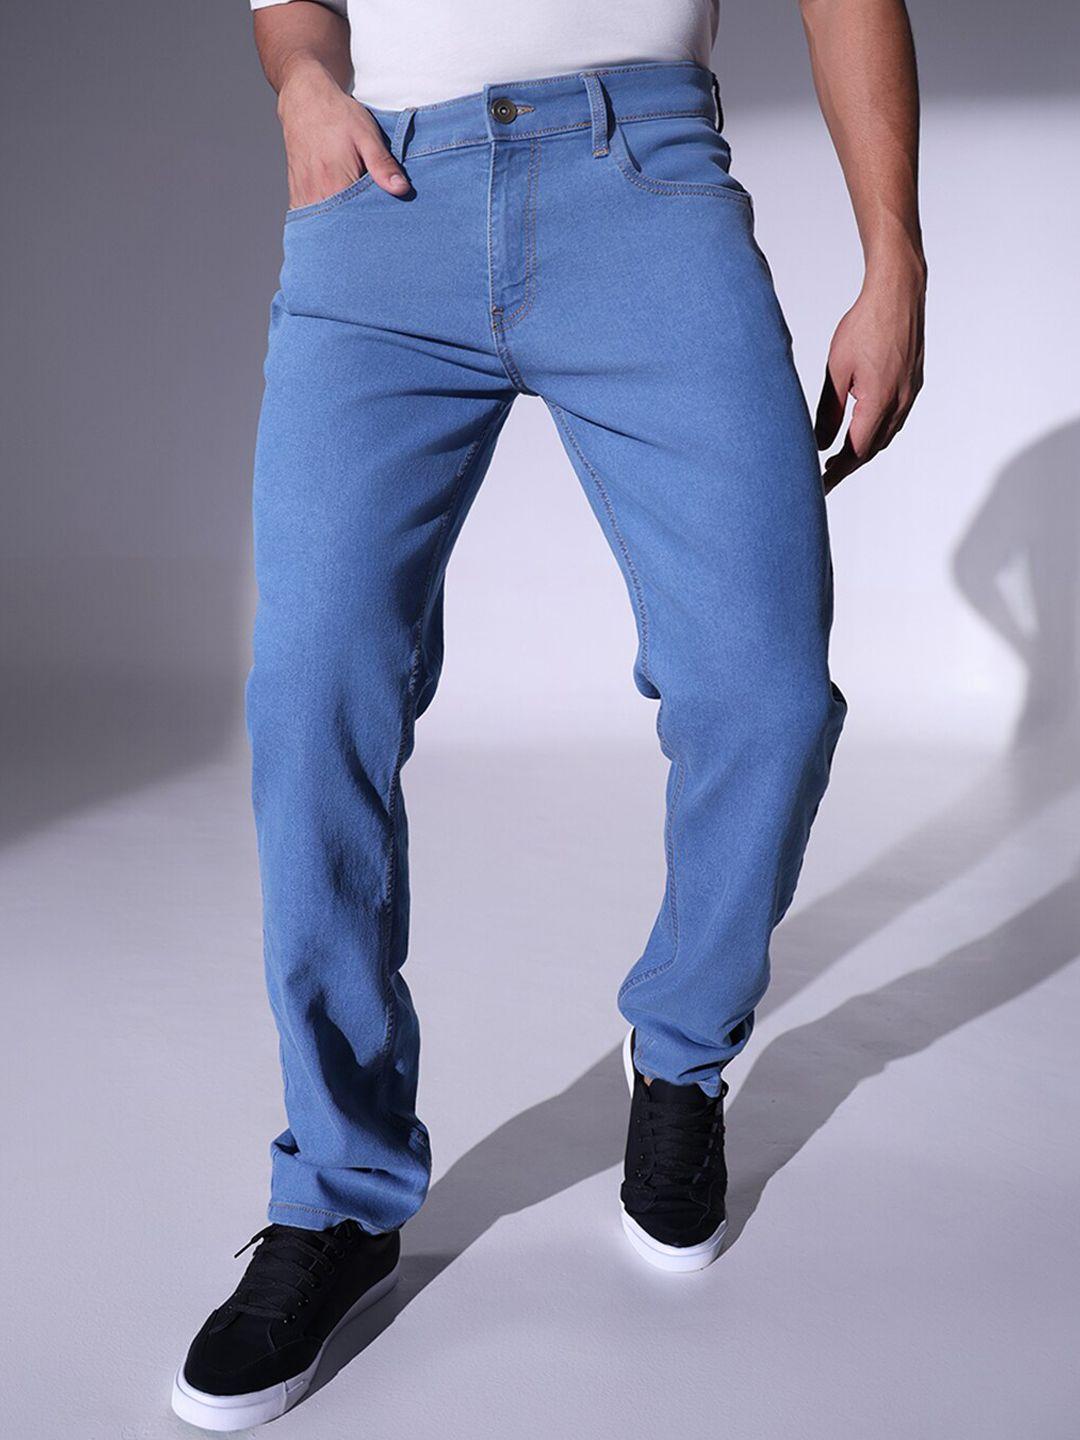 hubberholme men relaxed fit stretchable jeans